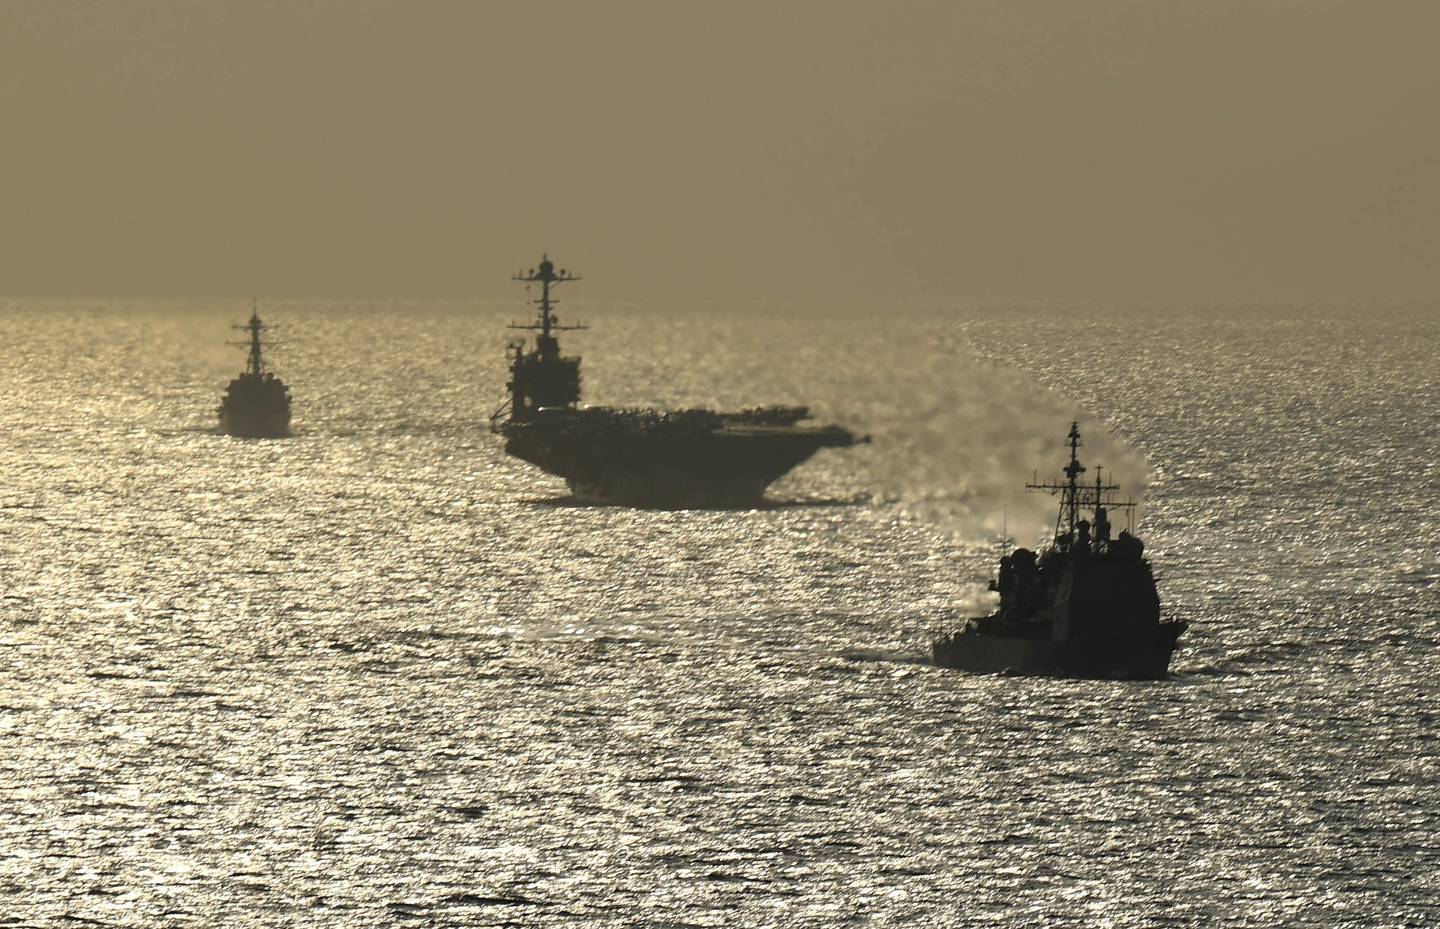 The Ticonderoga-class guided-missile cruiser USS Normandy (CG 60), front, the Nimitz-class aircraft carrier USS Harry S. Truman (CVN 75) and the Arleigh Burke-class guided-missile destroyer USS Lassen (DDG 82) transit the Atlantic Ocean on July 18, 2019.